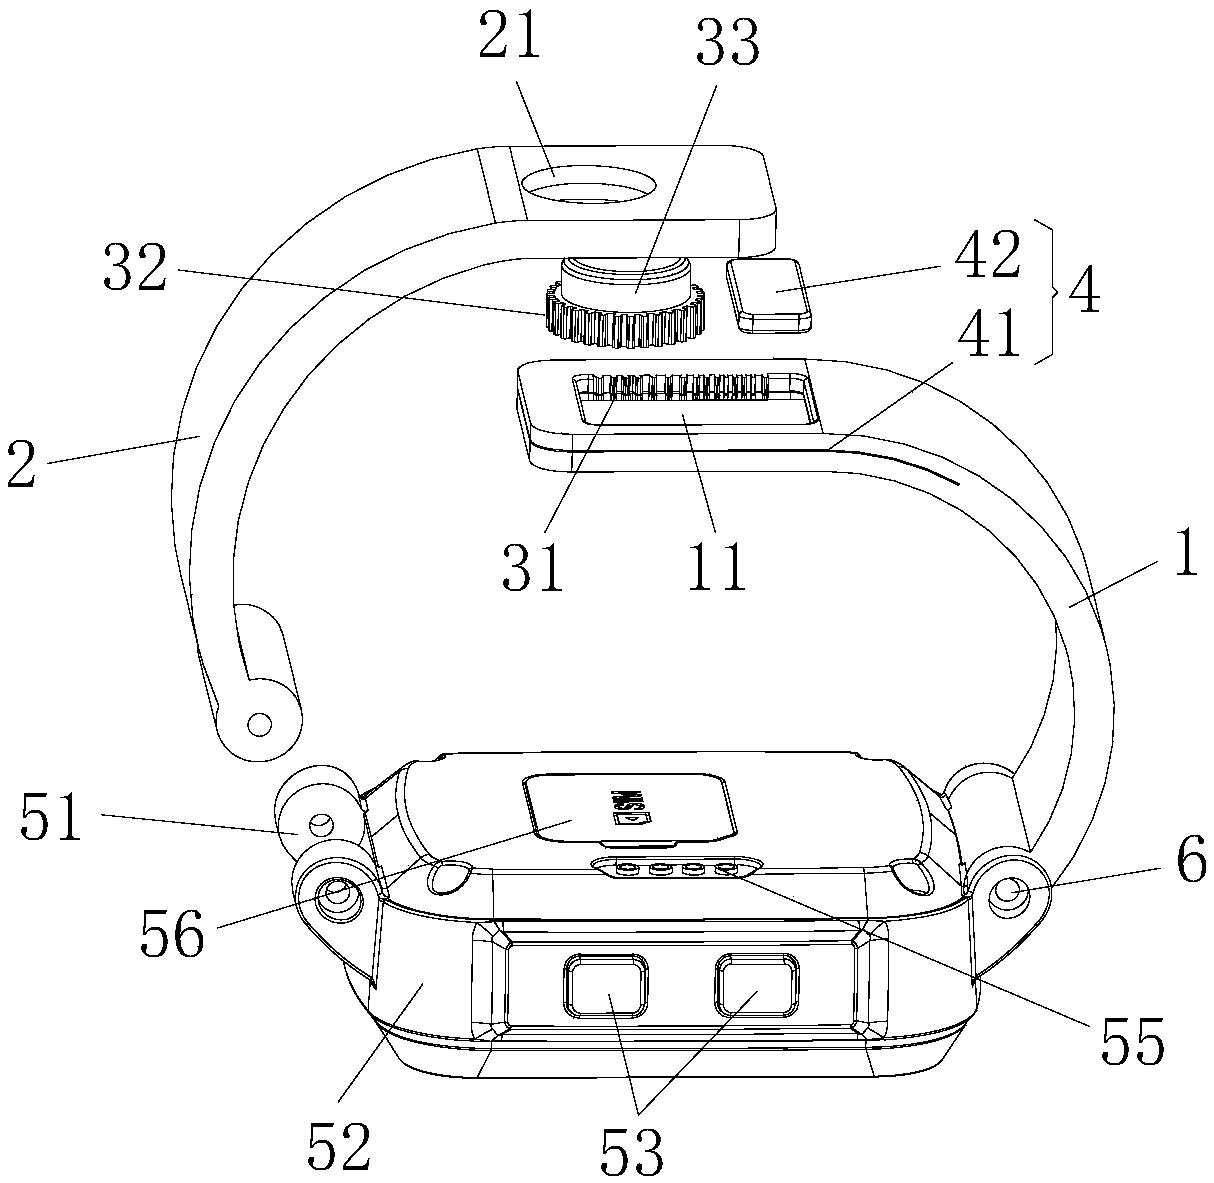 Watch strap adjusting structure and intelligent wearing device